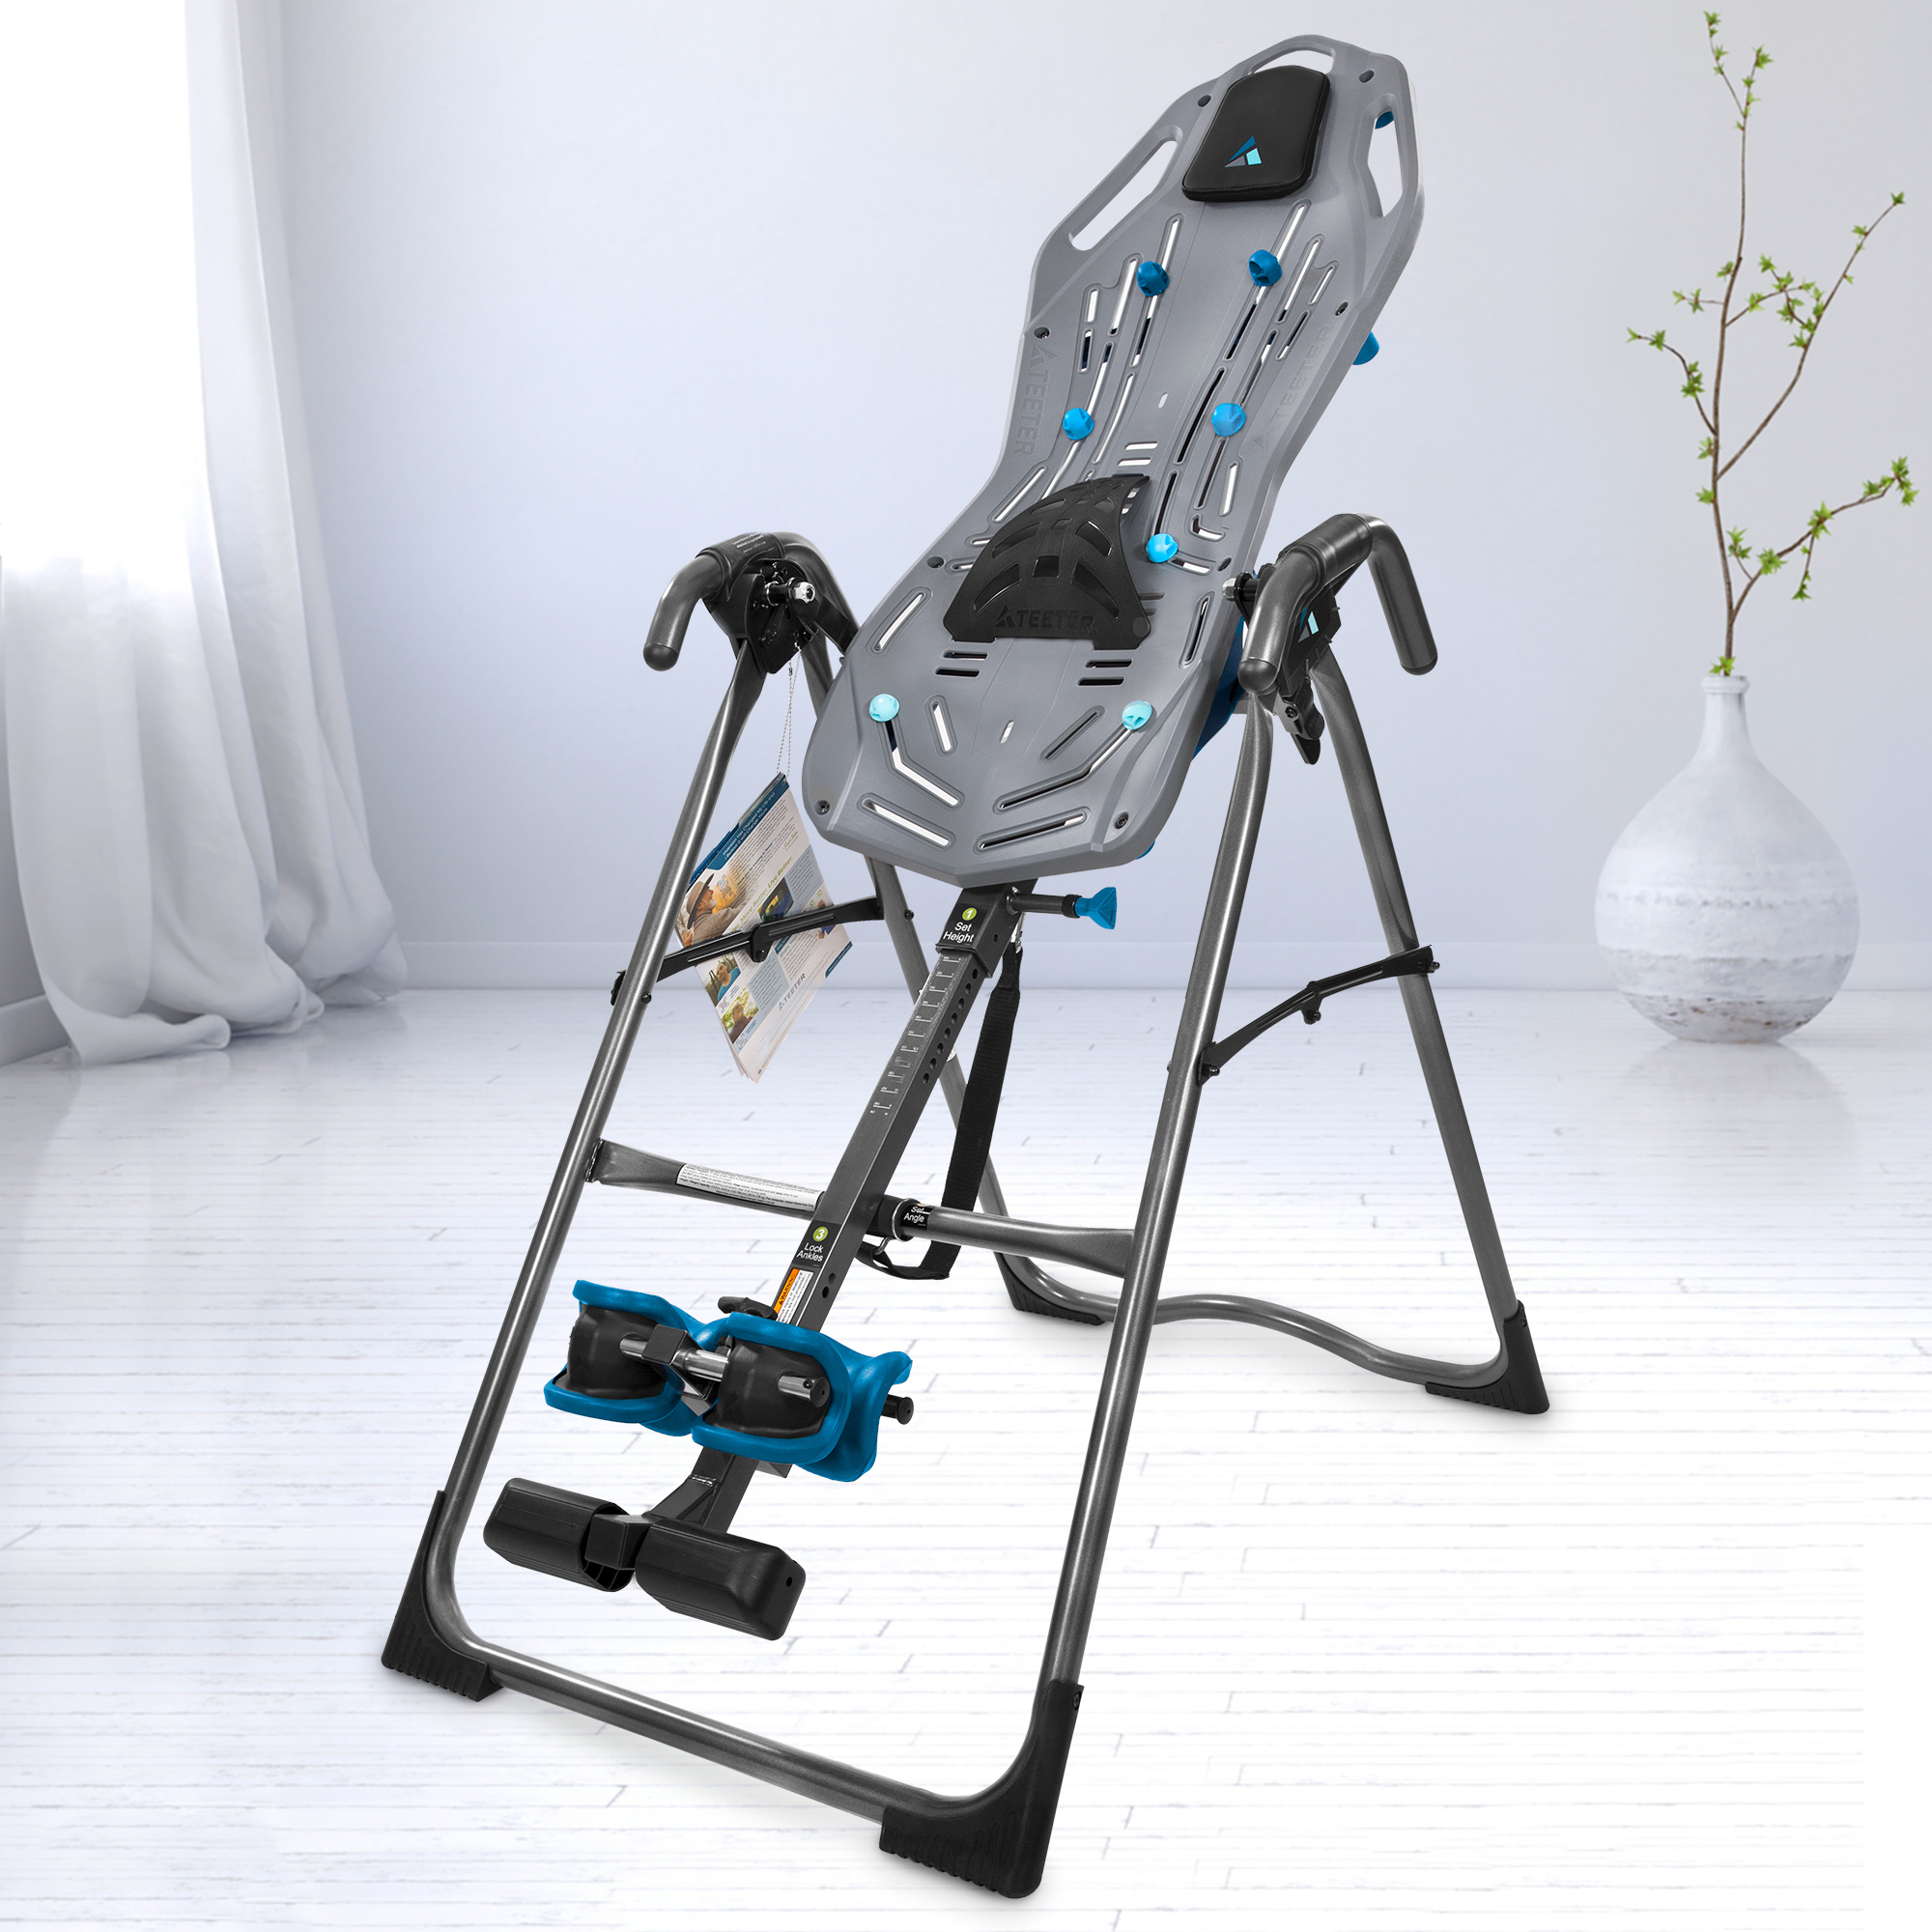 Inversion Table reviews.